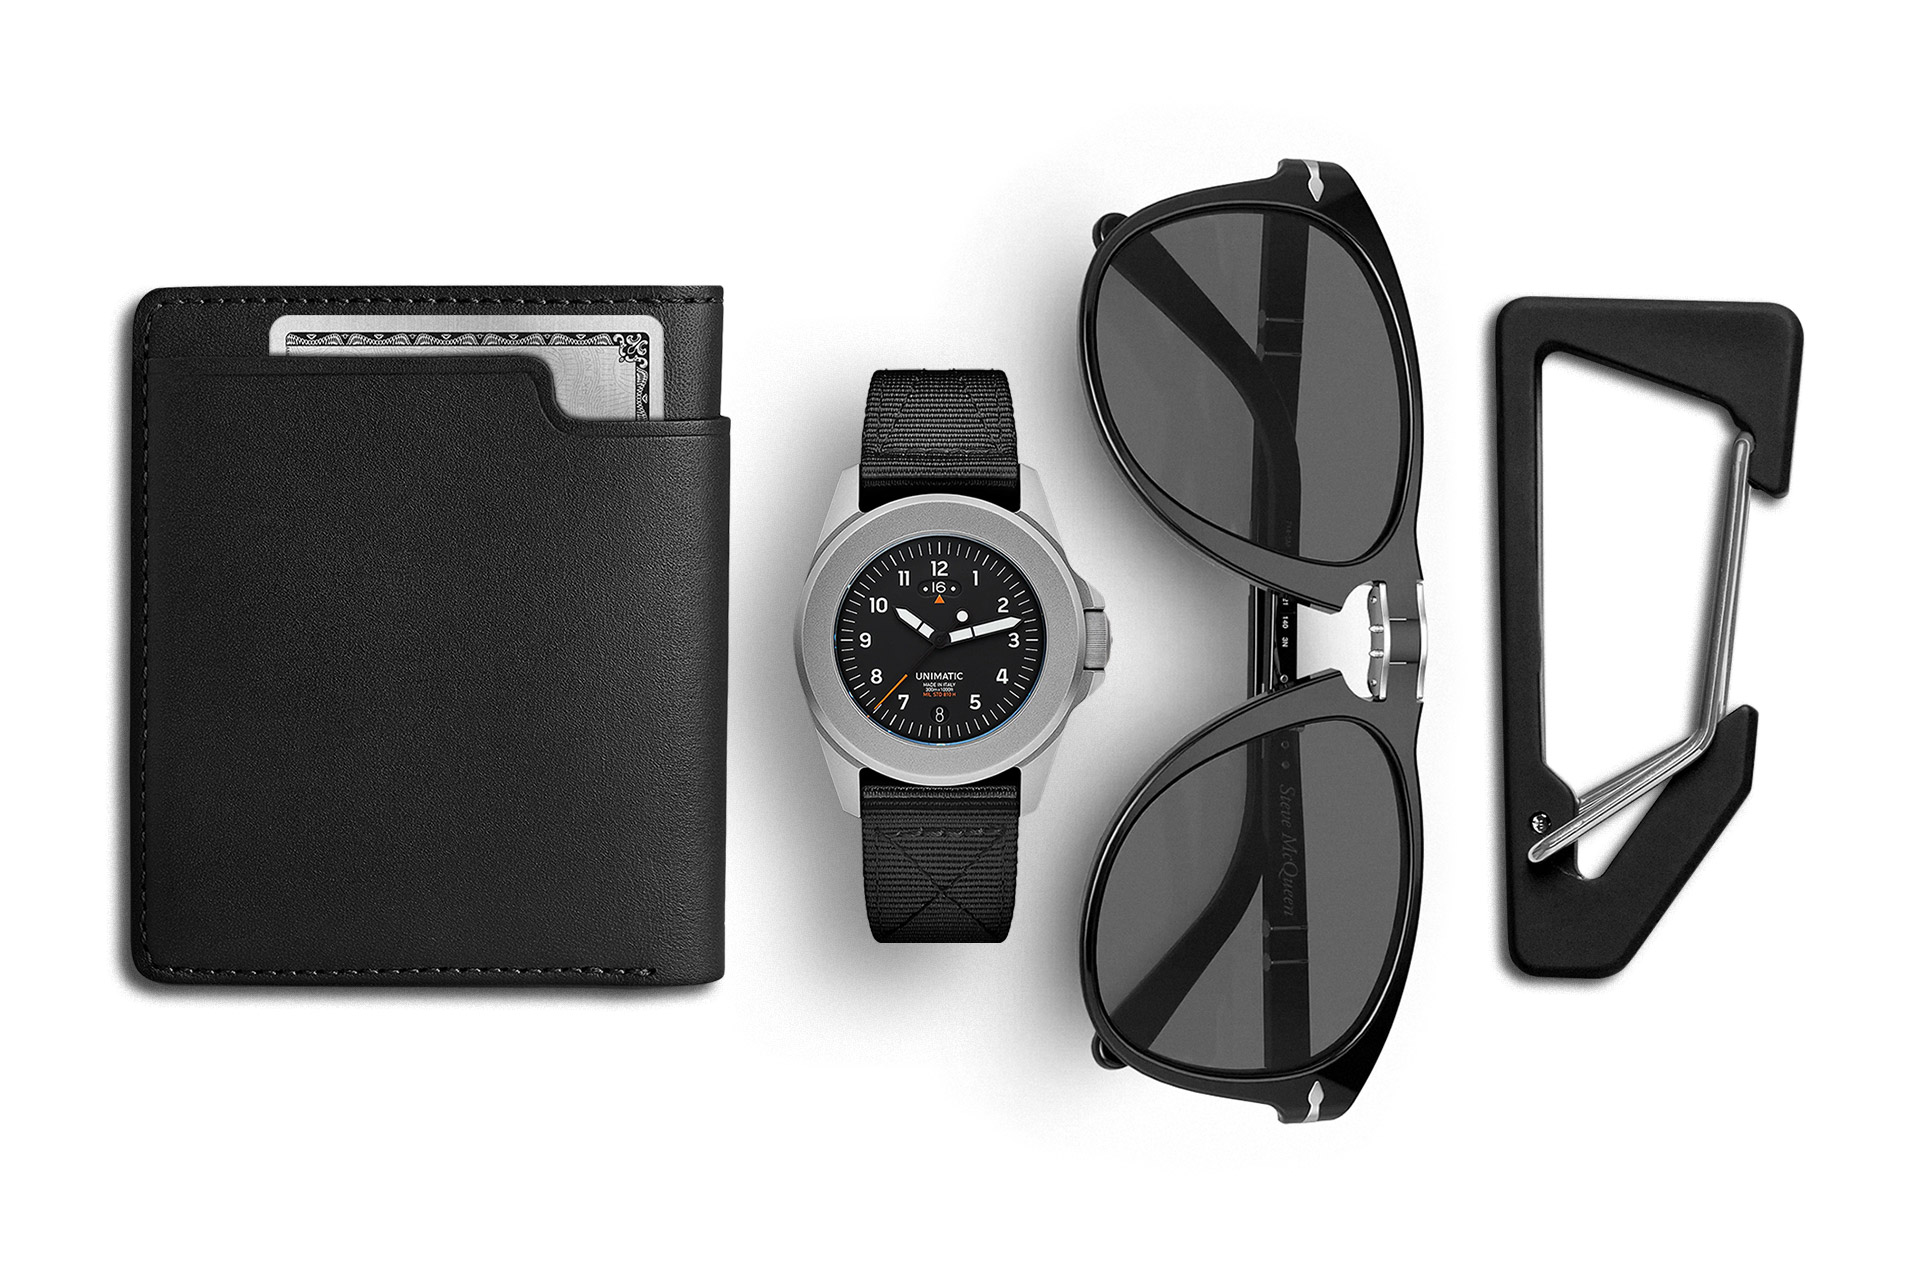 Everyday Carry: Black List | Uncrate, #Everyday #Carry #Black #List #Uncrate